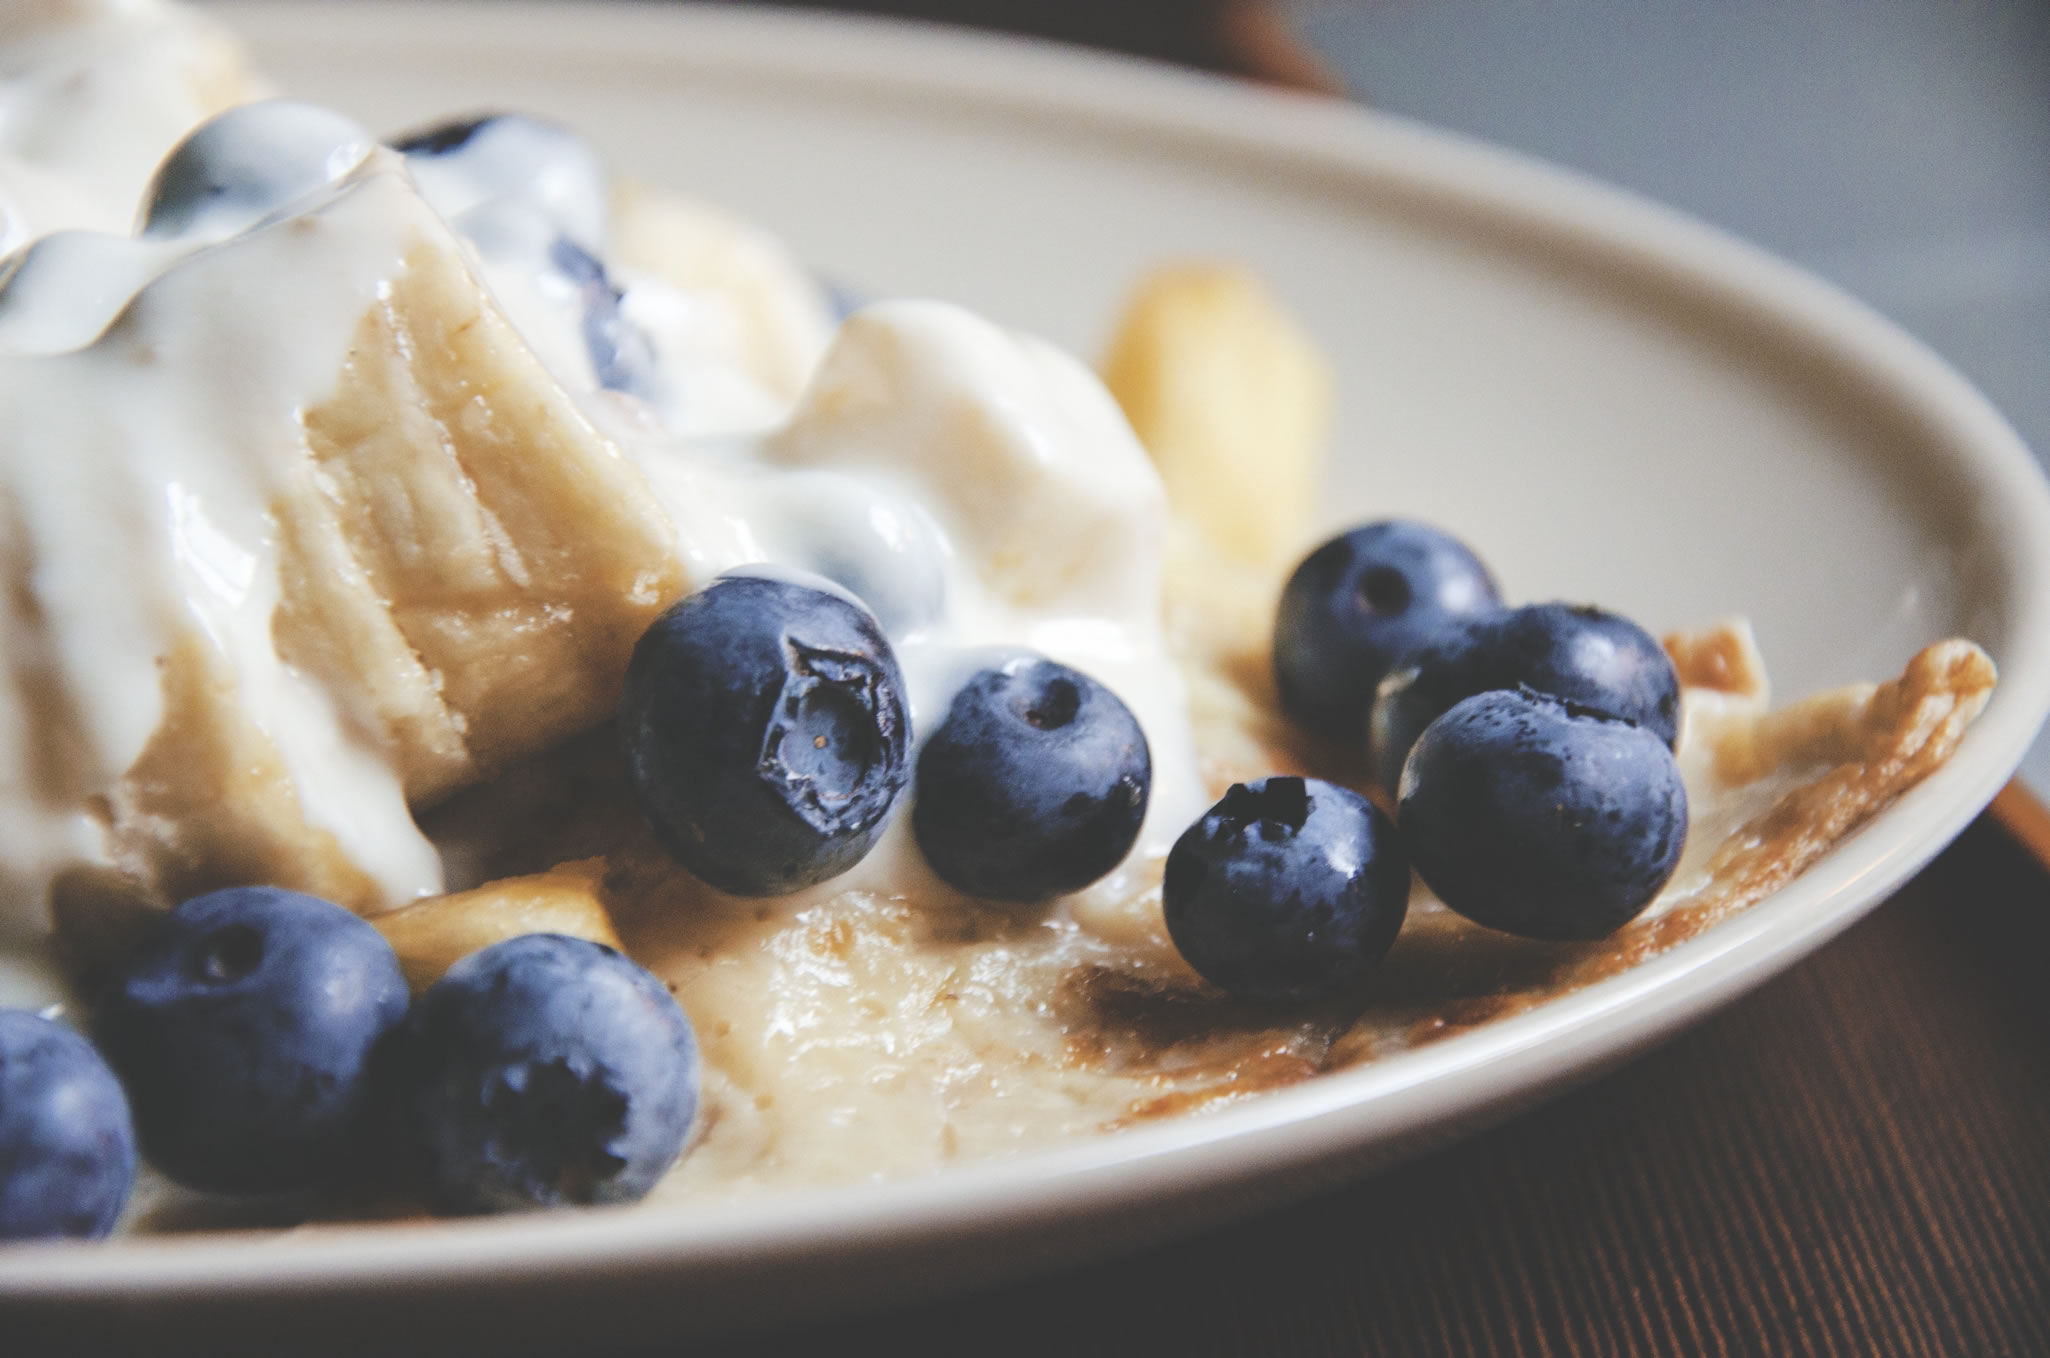 Footprints Foster Care - The Psychology of Pancakes